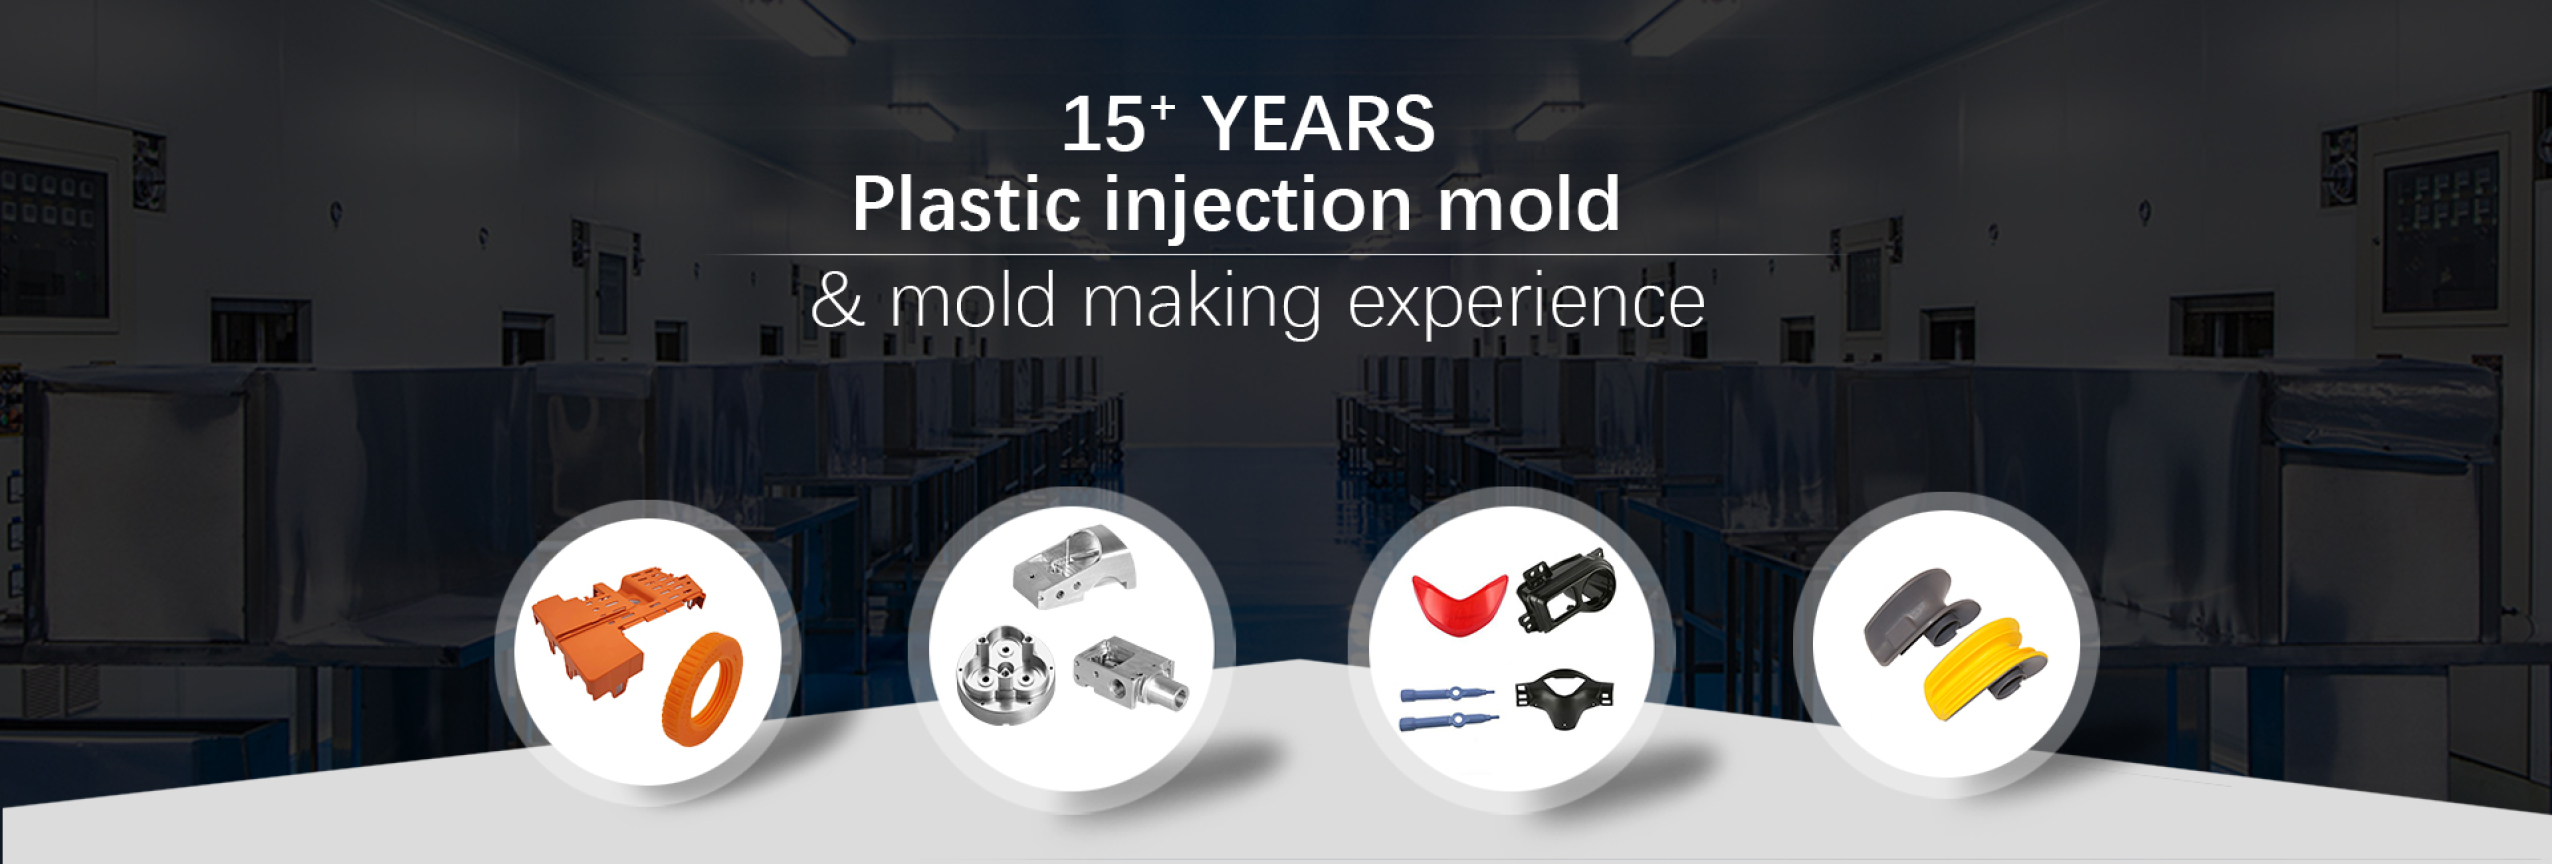 injection mold manufacturer